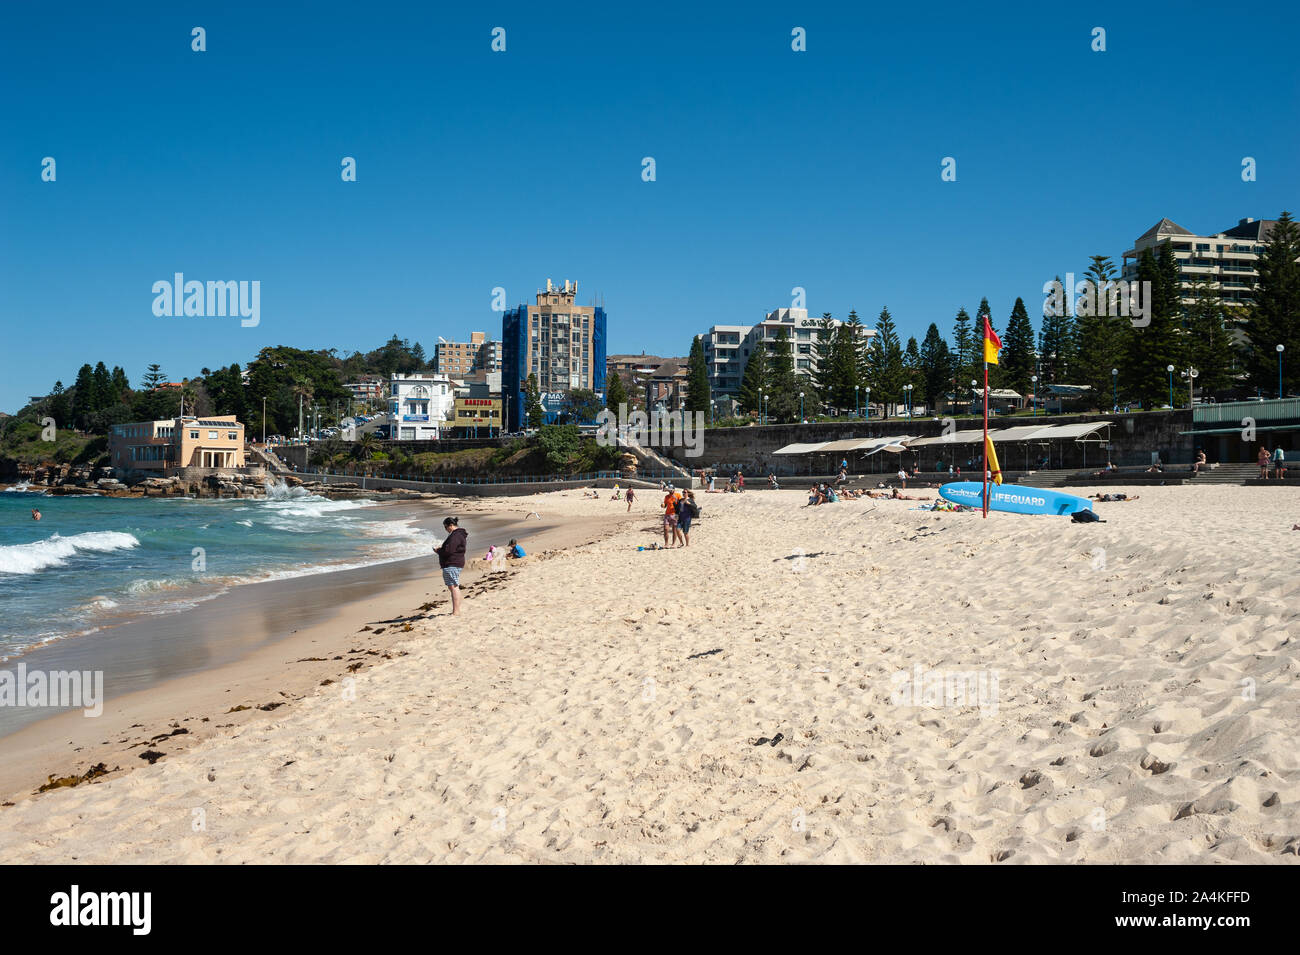 24.09.2019, Sydney, New South Wales, Australia - People in the sand under a clear blue sky on Coogee Beach with buildings in the backdrop. Stock Photo